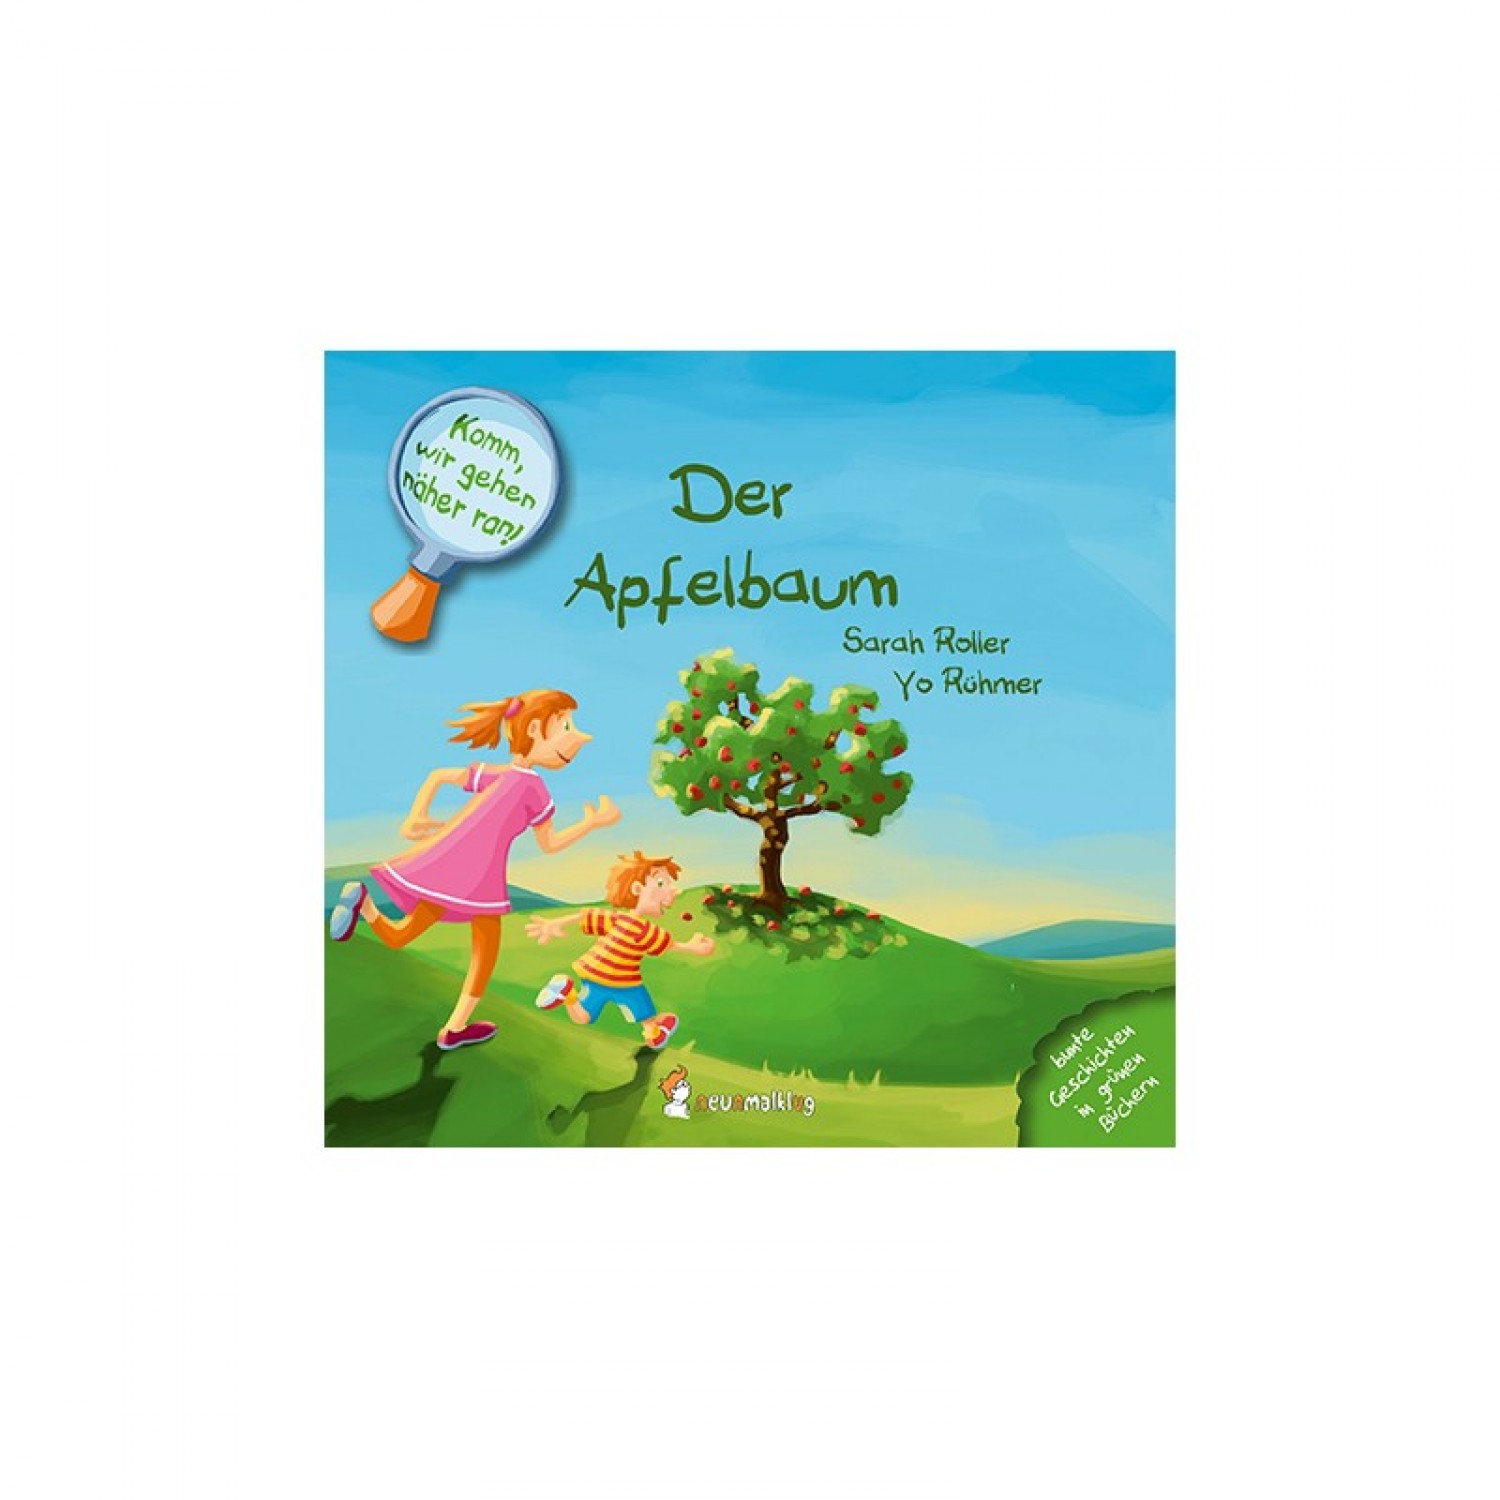 Picture Book Let’s get closer: The Apple Tree in German